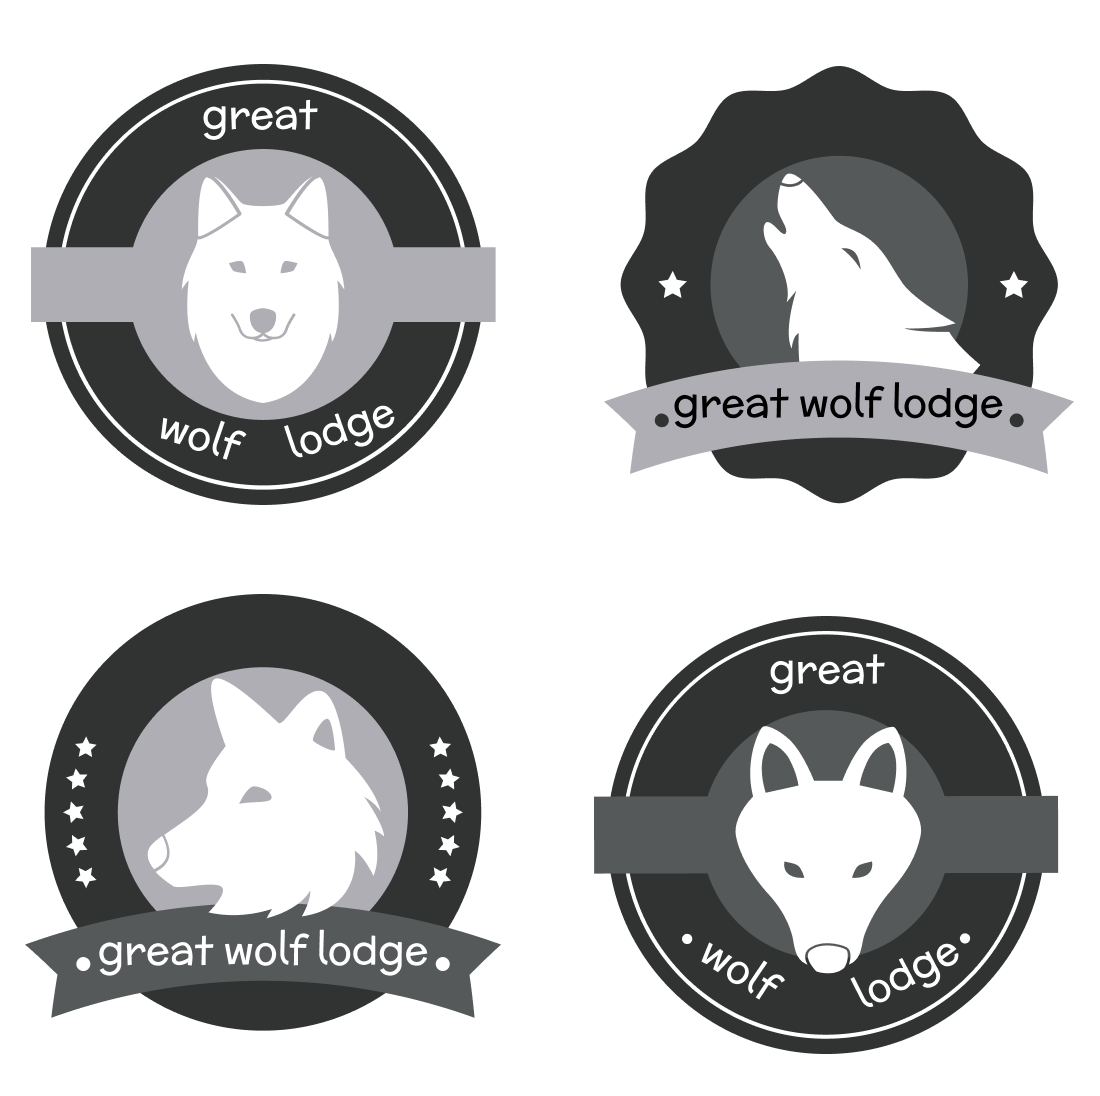 Set of four logos for a wolf lodge.